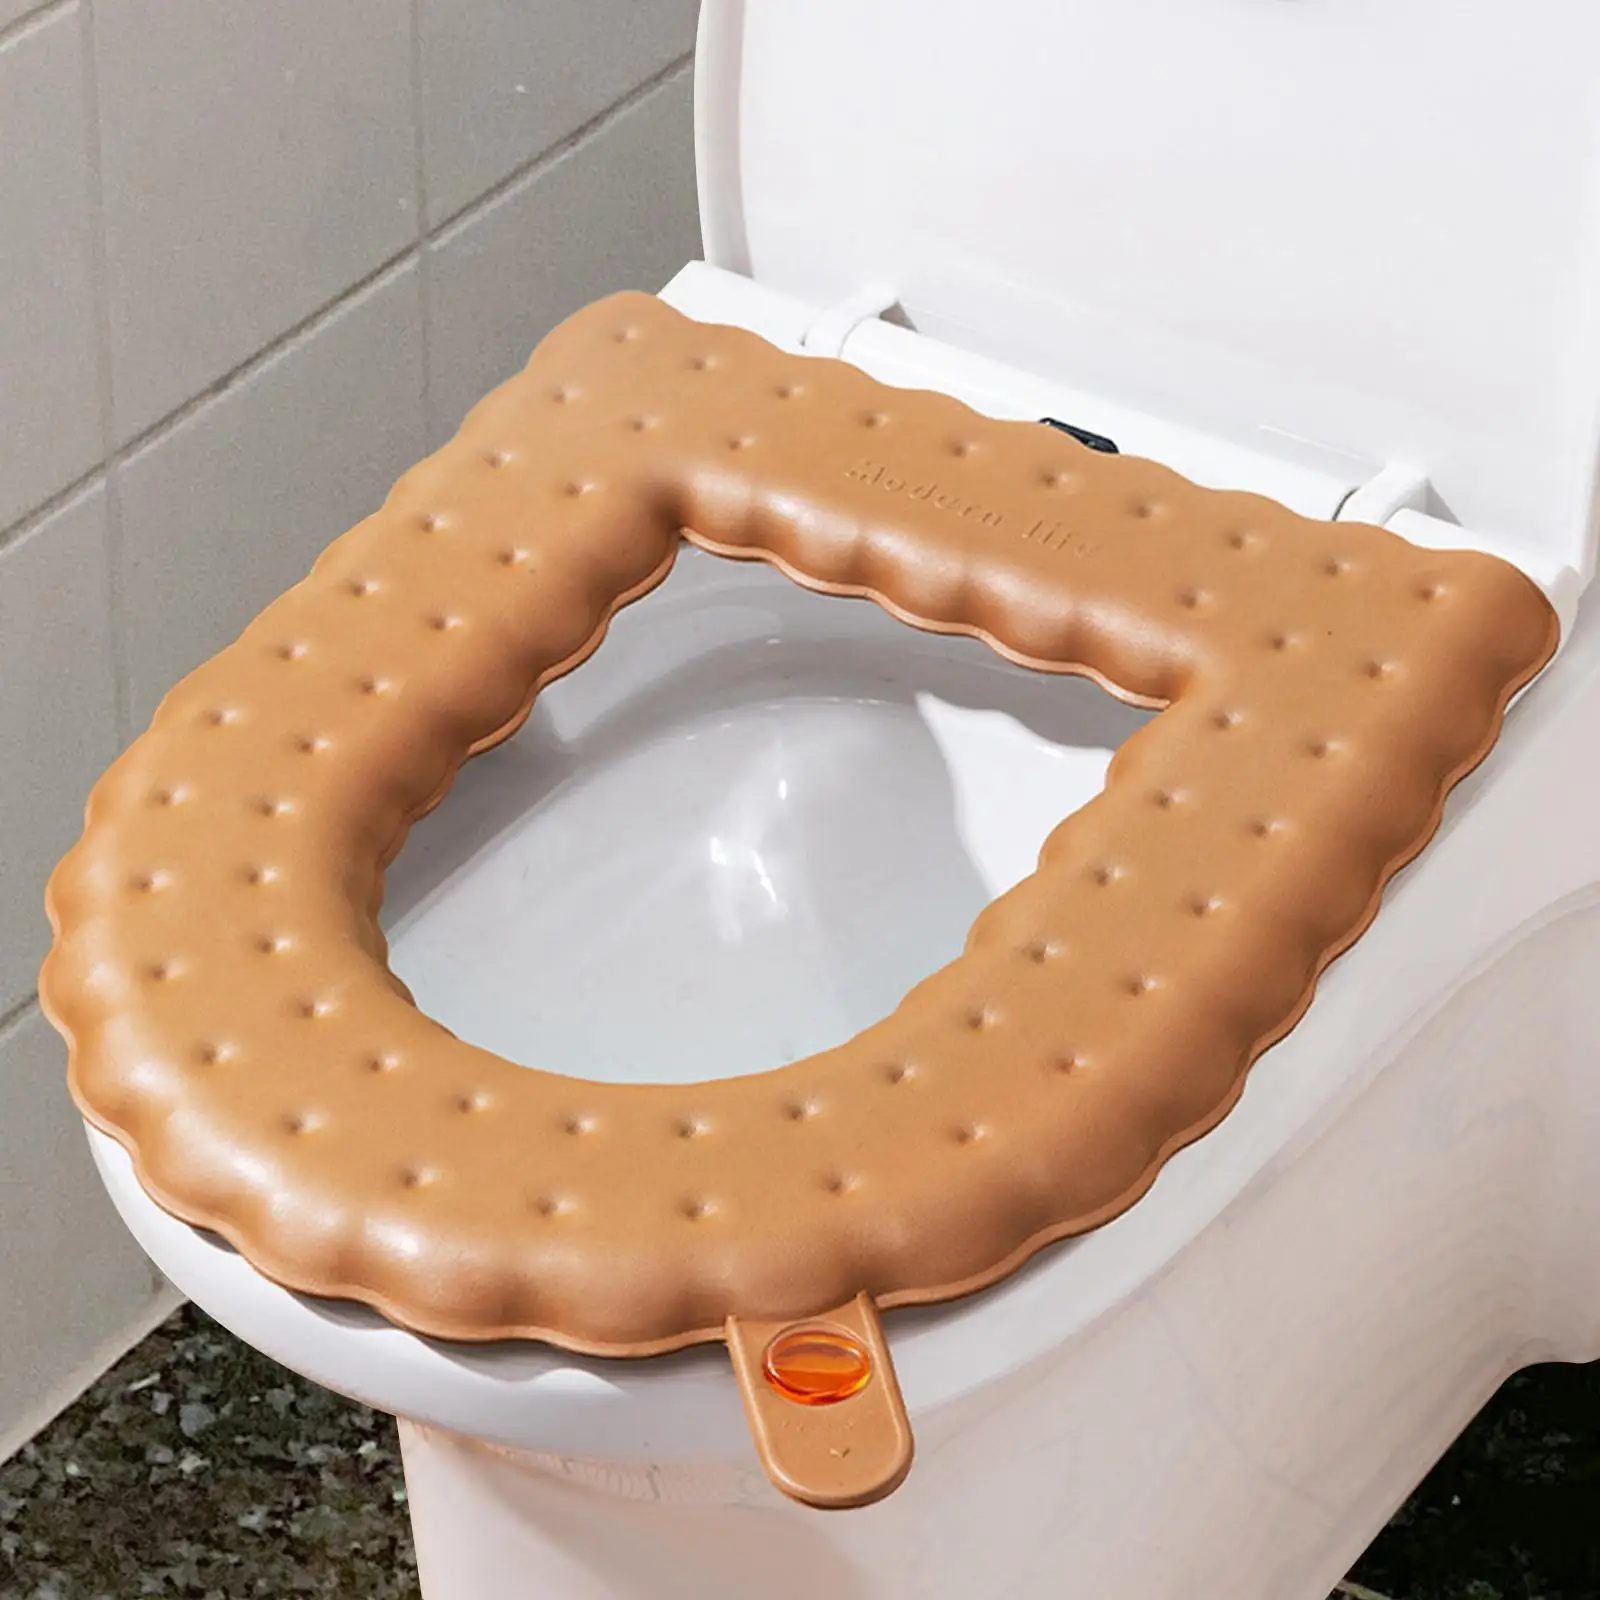 Thicken Toilet Seat Cover Bathroom Washable Practical Flexible with Portable Handle Waterproof for Dorm Home Farmhouse Travel